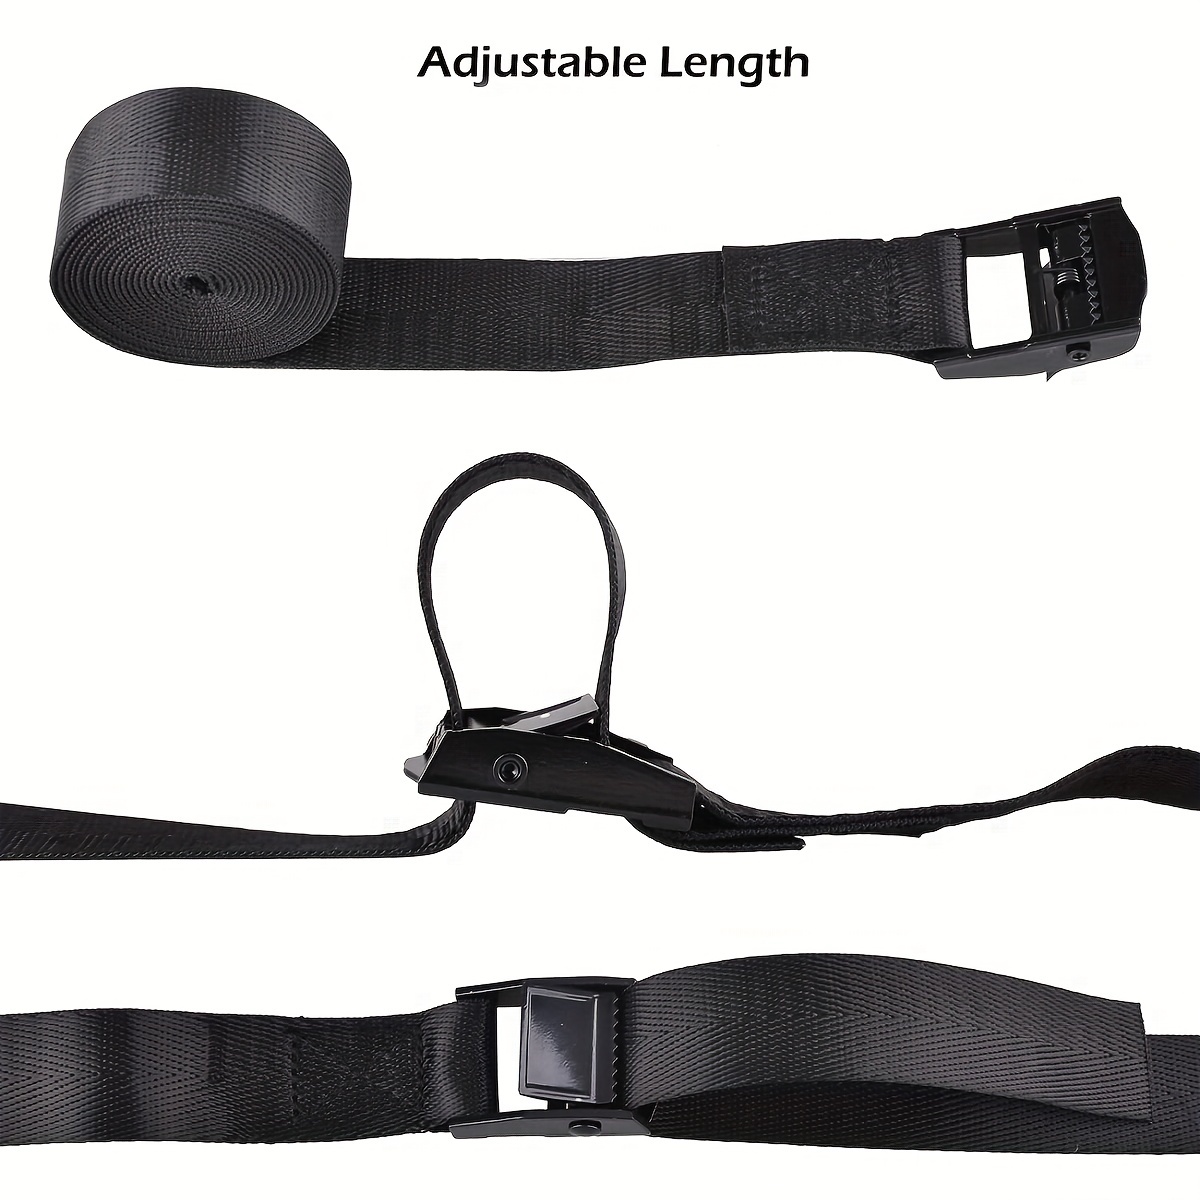 Lashing Secure Straps, 1 x 8ft Heavy Duty Cam Buckle Tie Down Straps  Adjustable Black Pull Cinch Strap for Cargo, Luggage, Bicycles,  Motorcycles